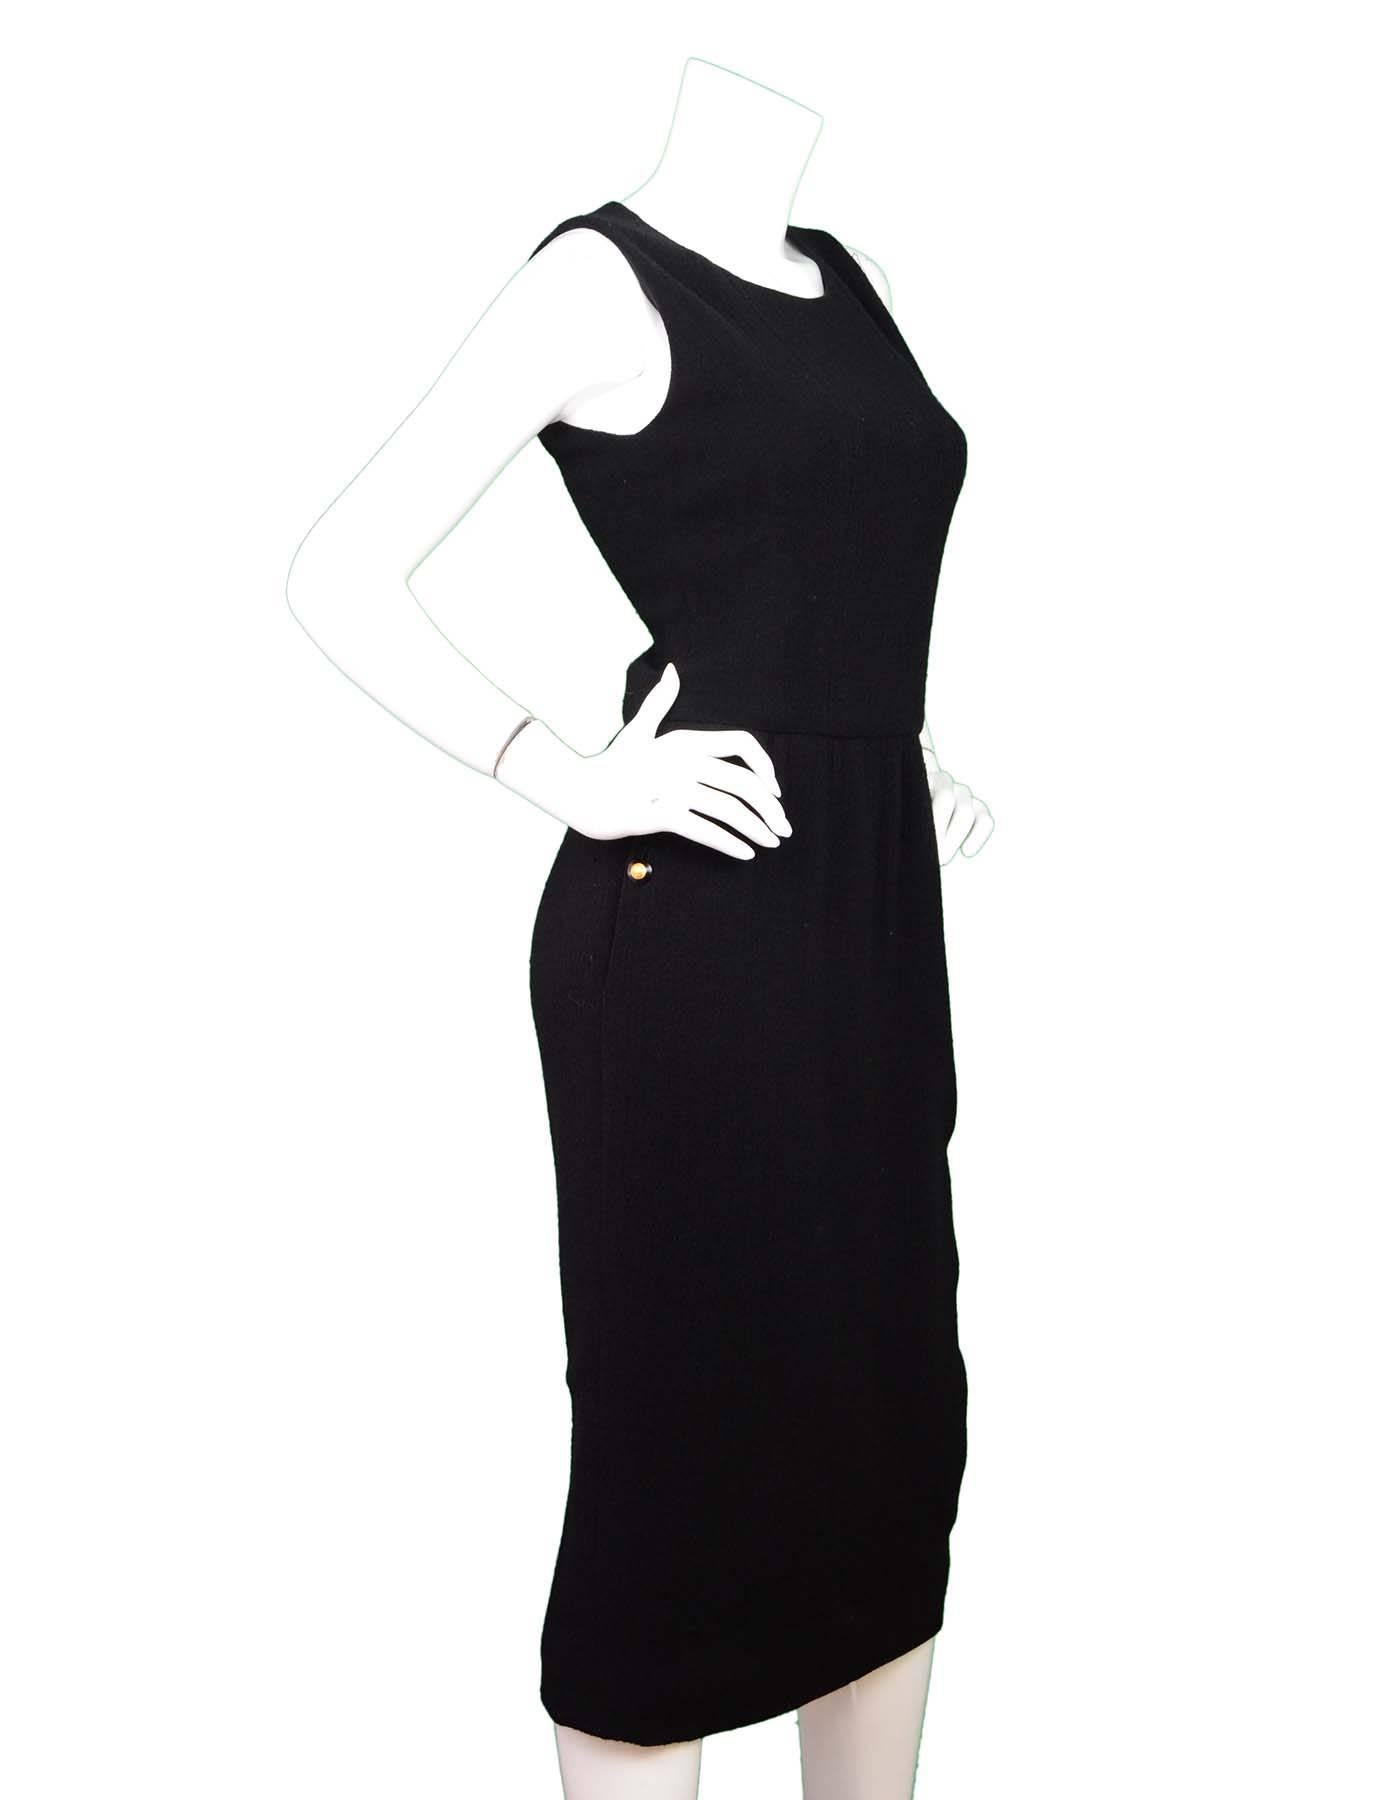 Chanel Black Sleeveless Long Dress

Color: Black
Composition: Not listed, believed to be wool blend
Lining: Black lining
Closure/Opening: Back zip closure
Exterior Pockets: Two side pockets with button detail
Overall Condition: Very good